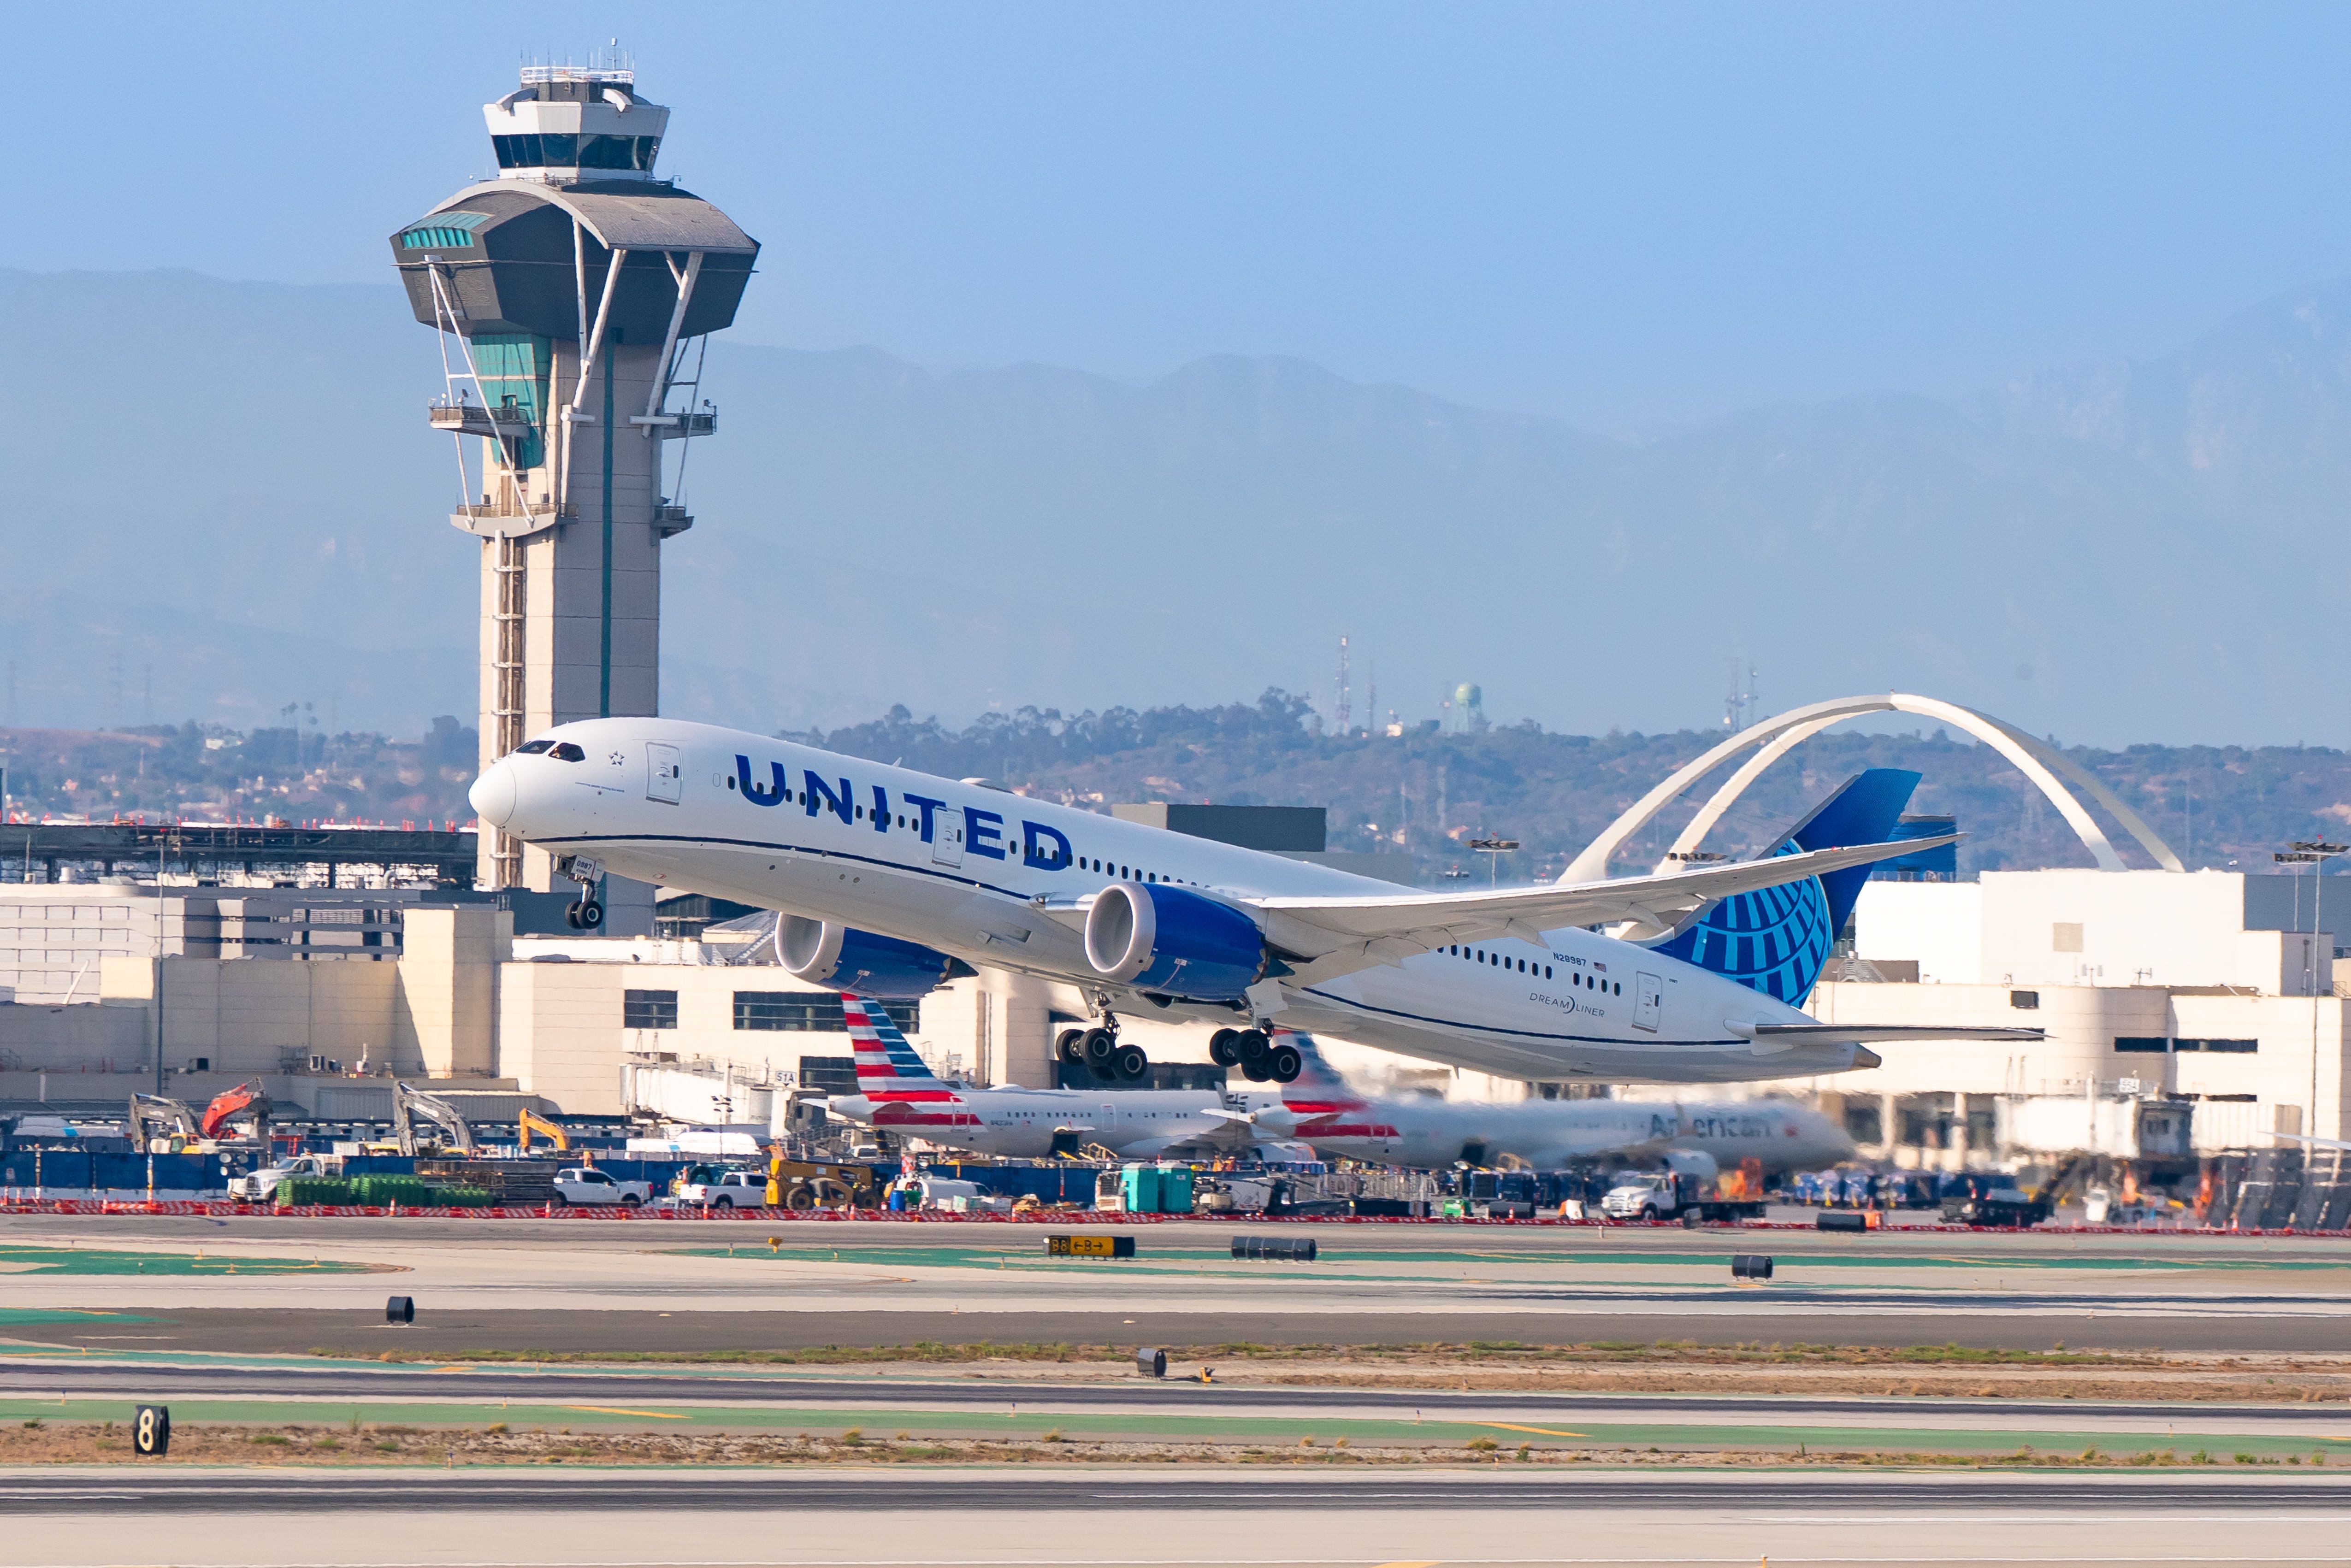 US airlines at LAX airport getty